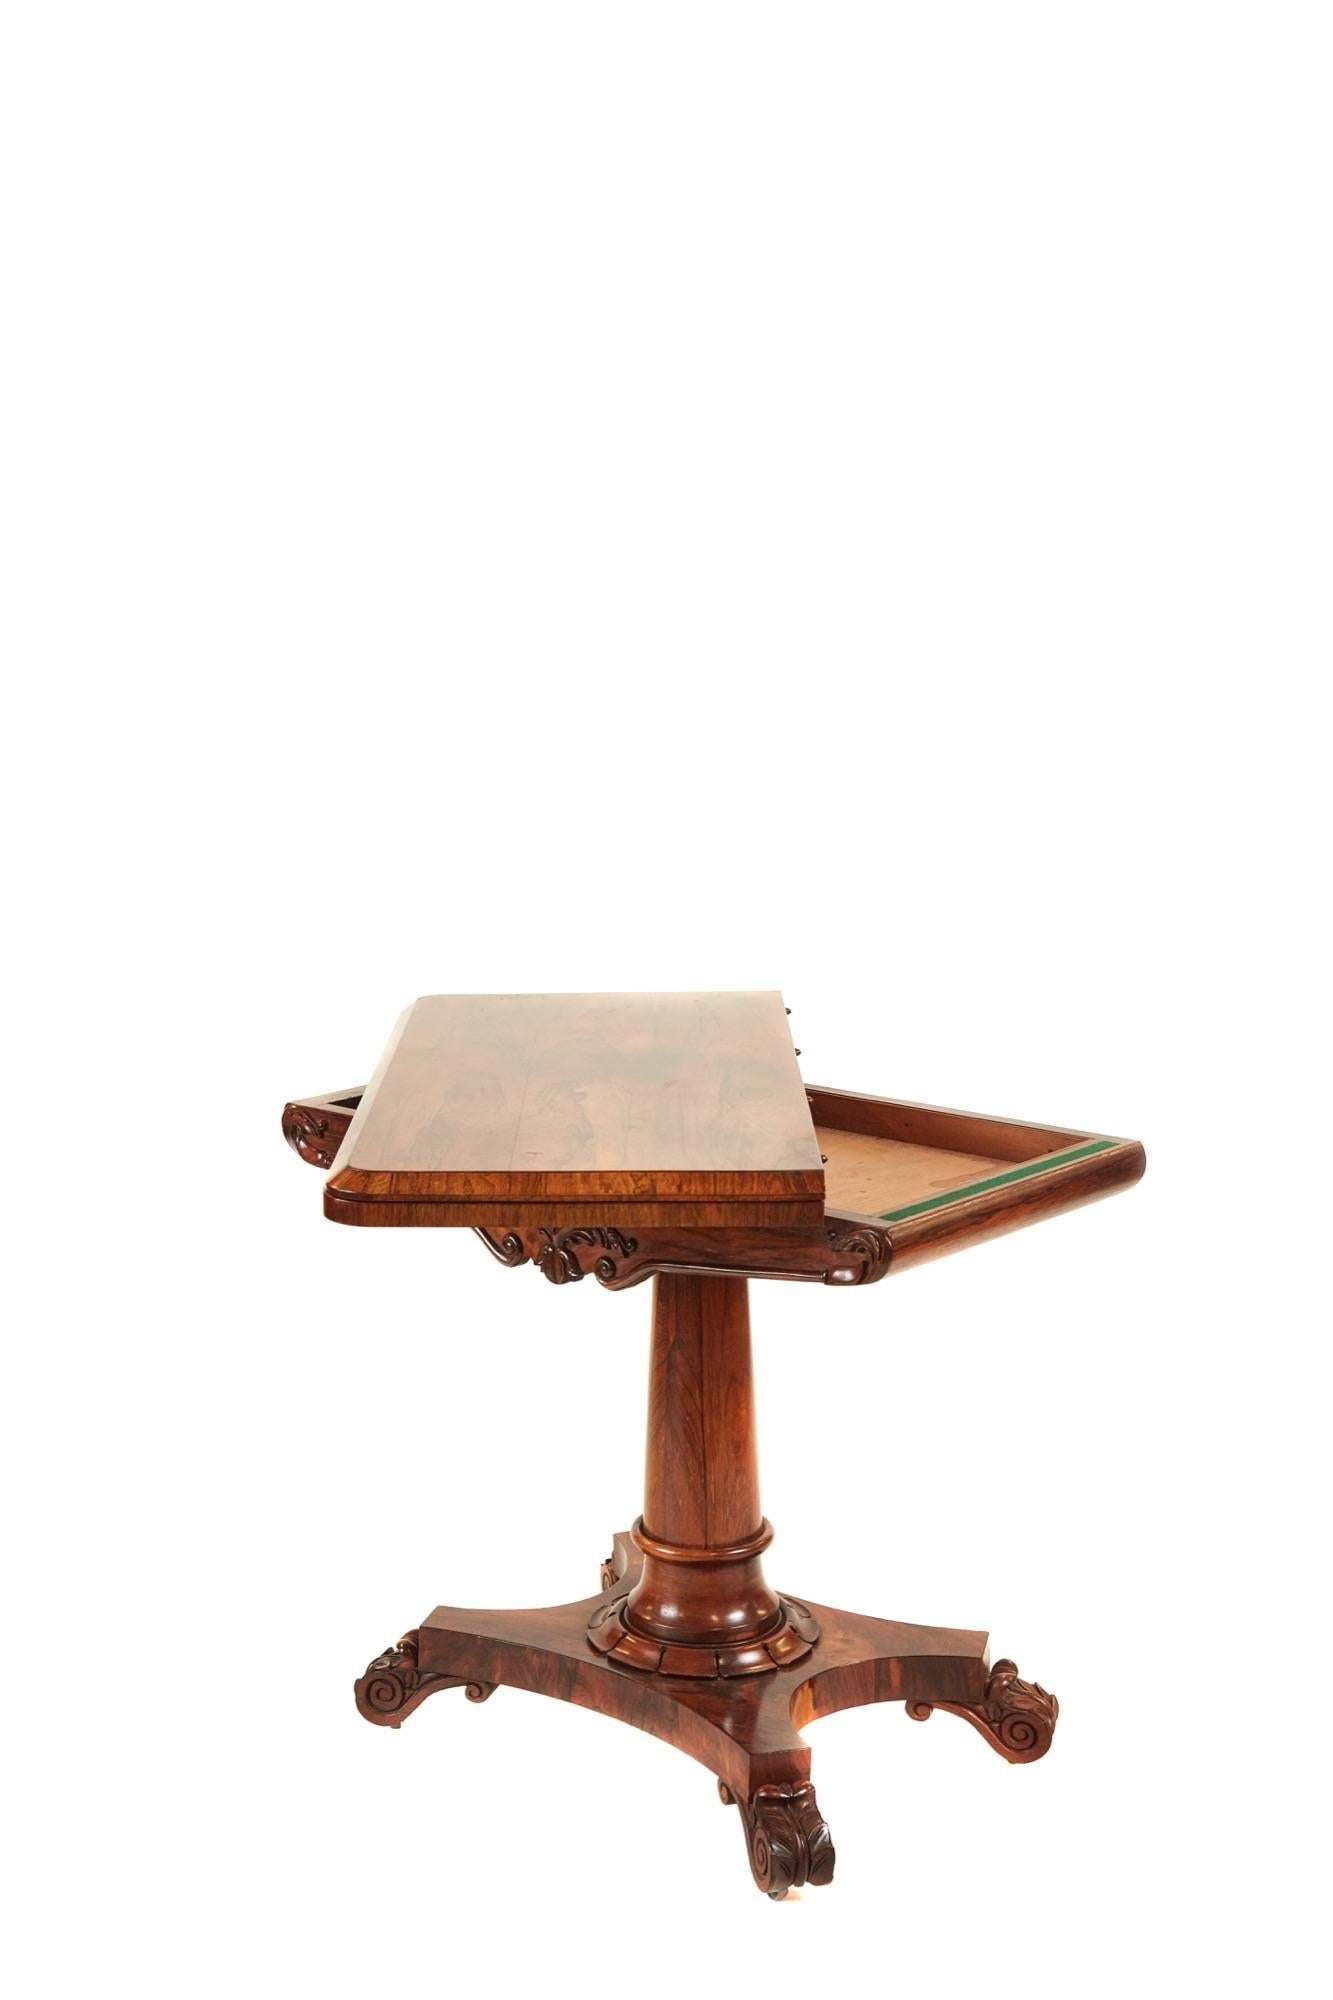 William IV rosewood card table, with a lovely figured rosewood top that lifts and swivels to reveal a green baize interior, nice carved frieze supported by a turned rosewood pedestal with a carved collar finishing on a quatrefoil base with scroll